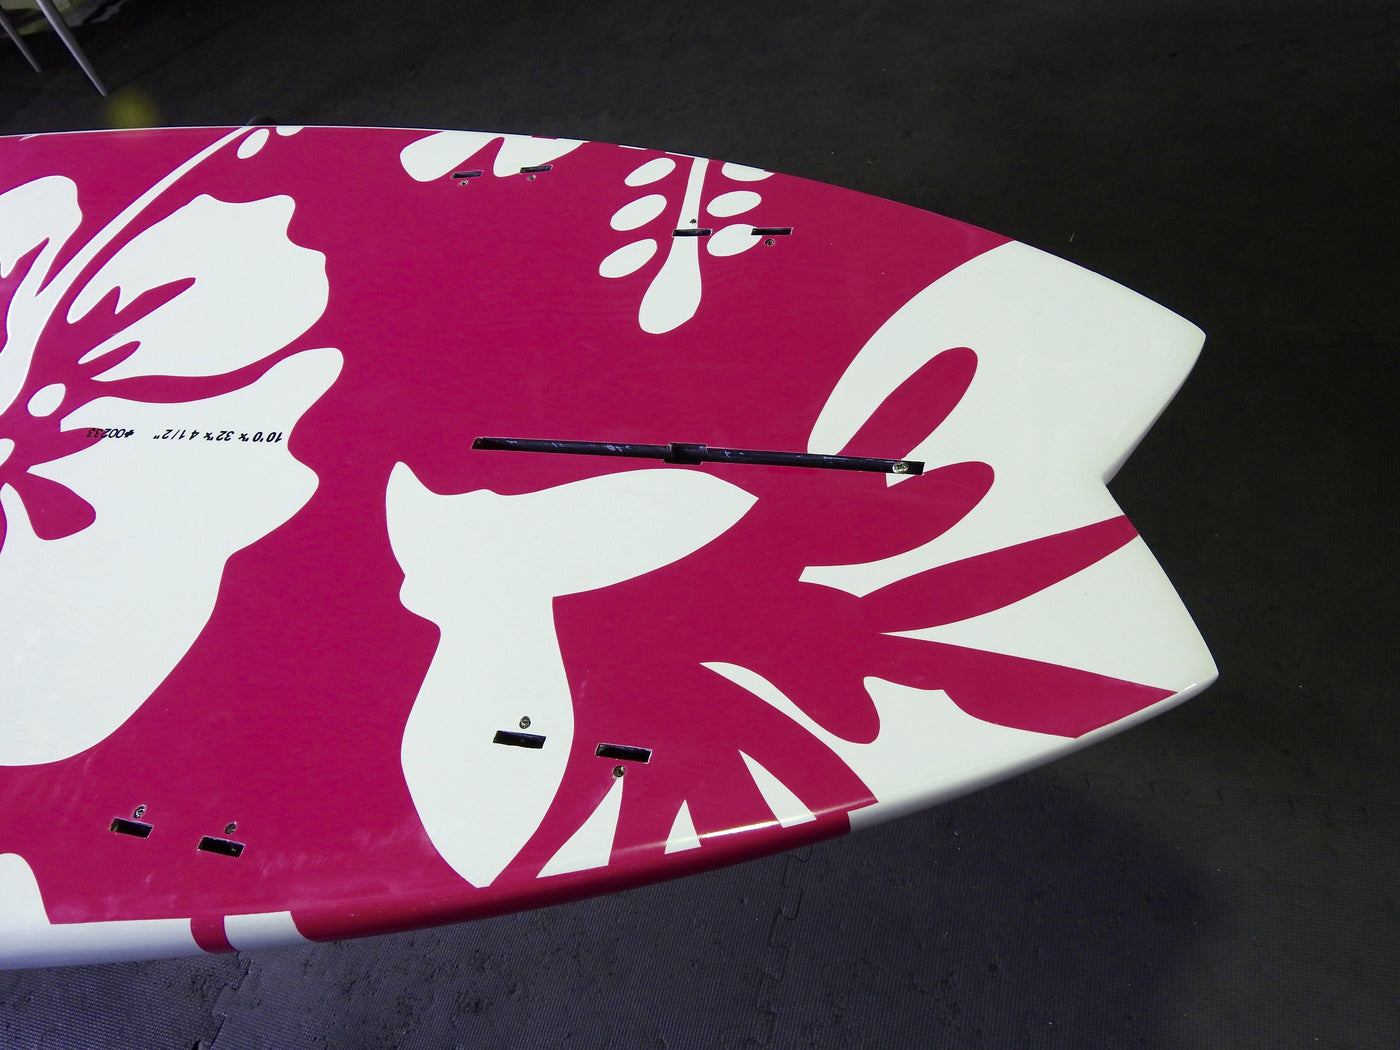 10' x 32" Bamboo Pink Hibiscus Flowers Performance Alleydesigns SUP @ 9kg - Alleydesigns  Pty Ltd                                             ABN: 44165571264